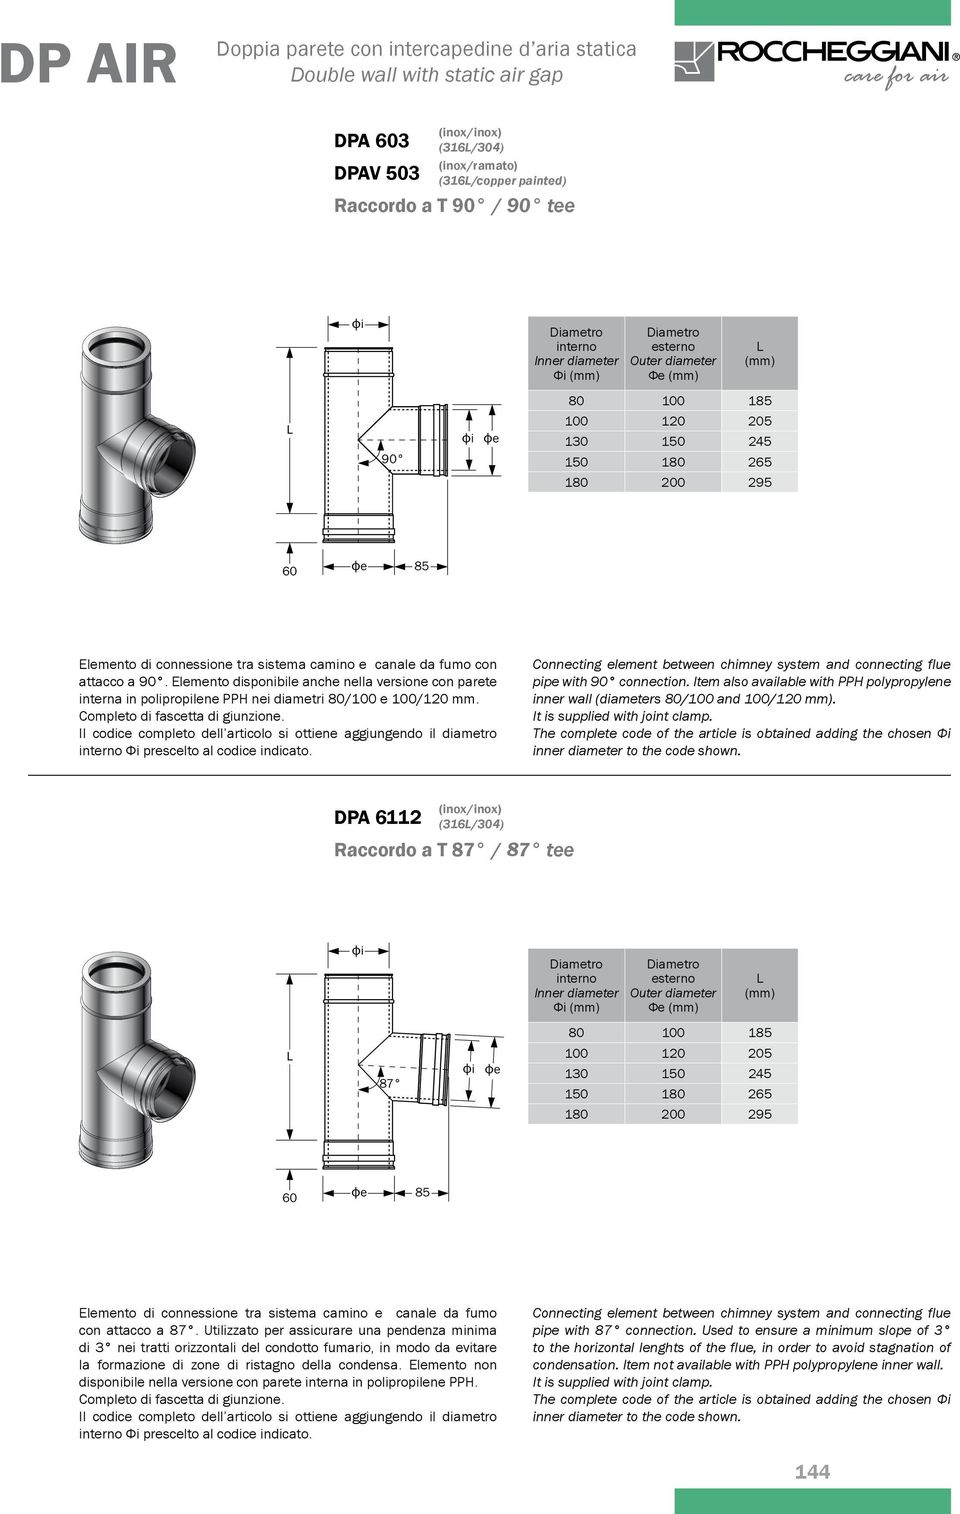 Connecting element between chimney system and connecting flue pipe with 90 connection. Item also available with PP polypropylene inner wall (diameters 80/100 and 100/120 mm).